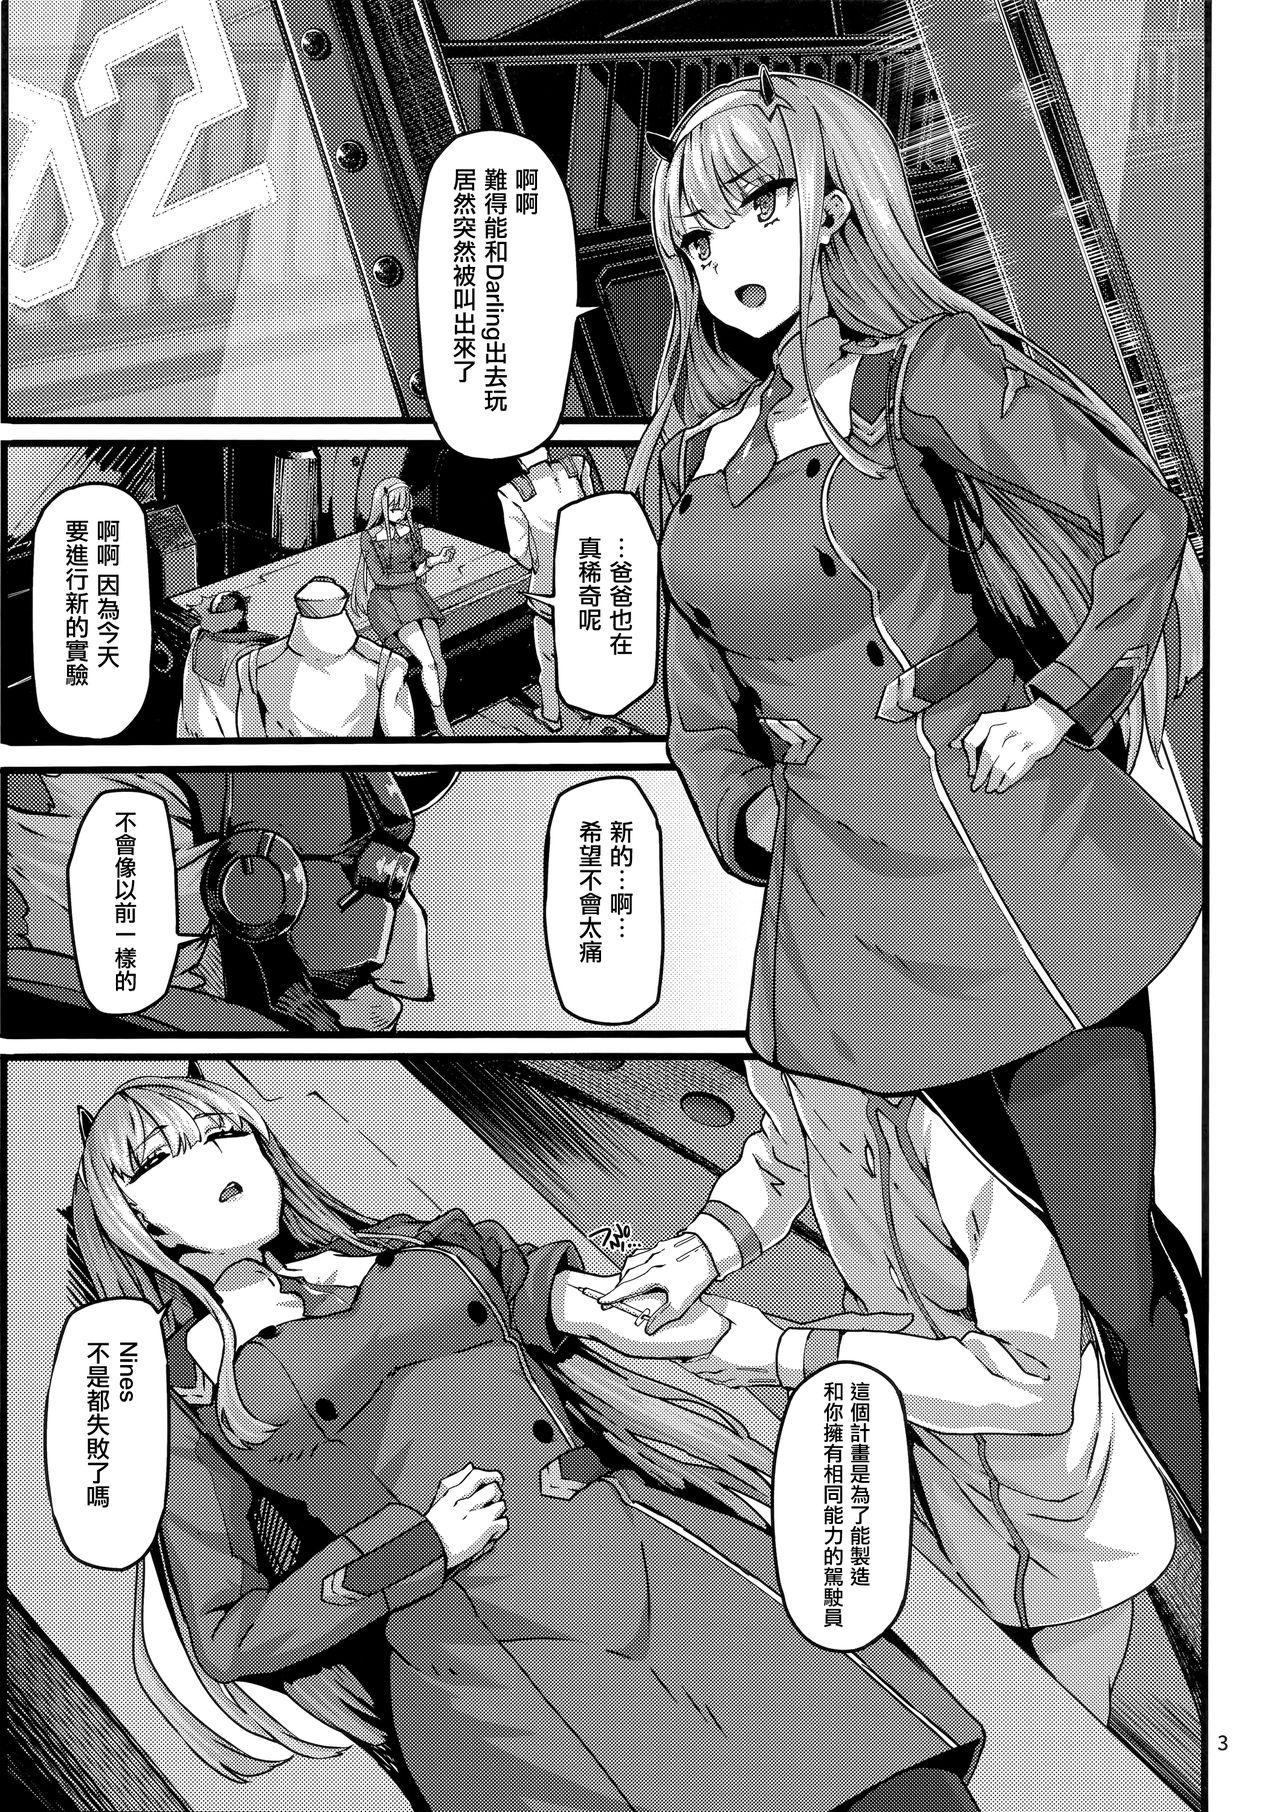 Grosso reginae - Darling in the franxx Pink Pussy - Page 2